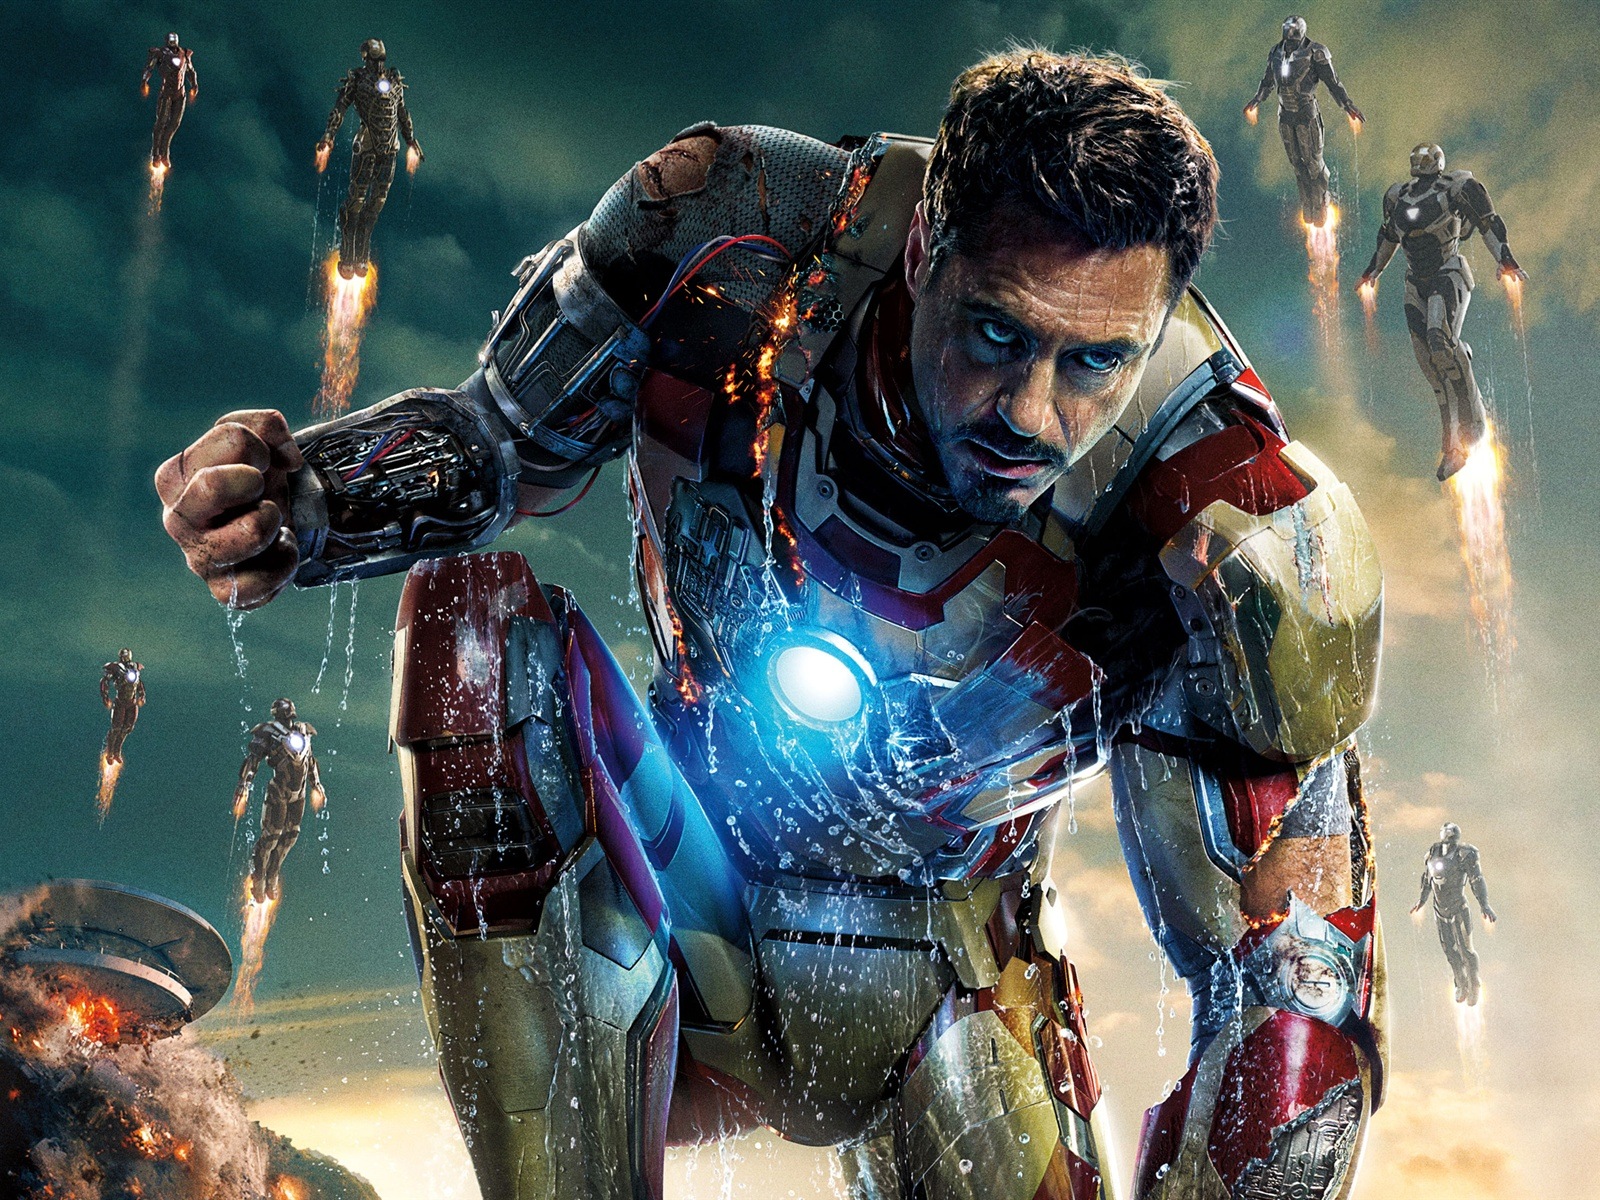 2013 Iron Man 3 newest HD wallpapers #12 - 1600x1200